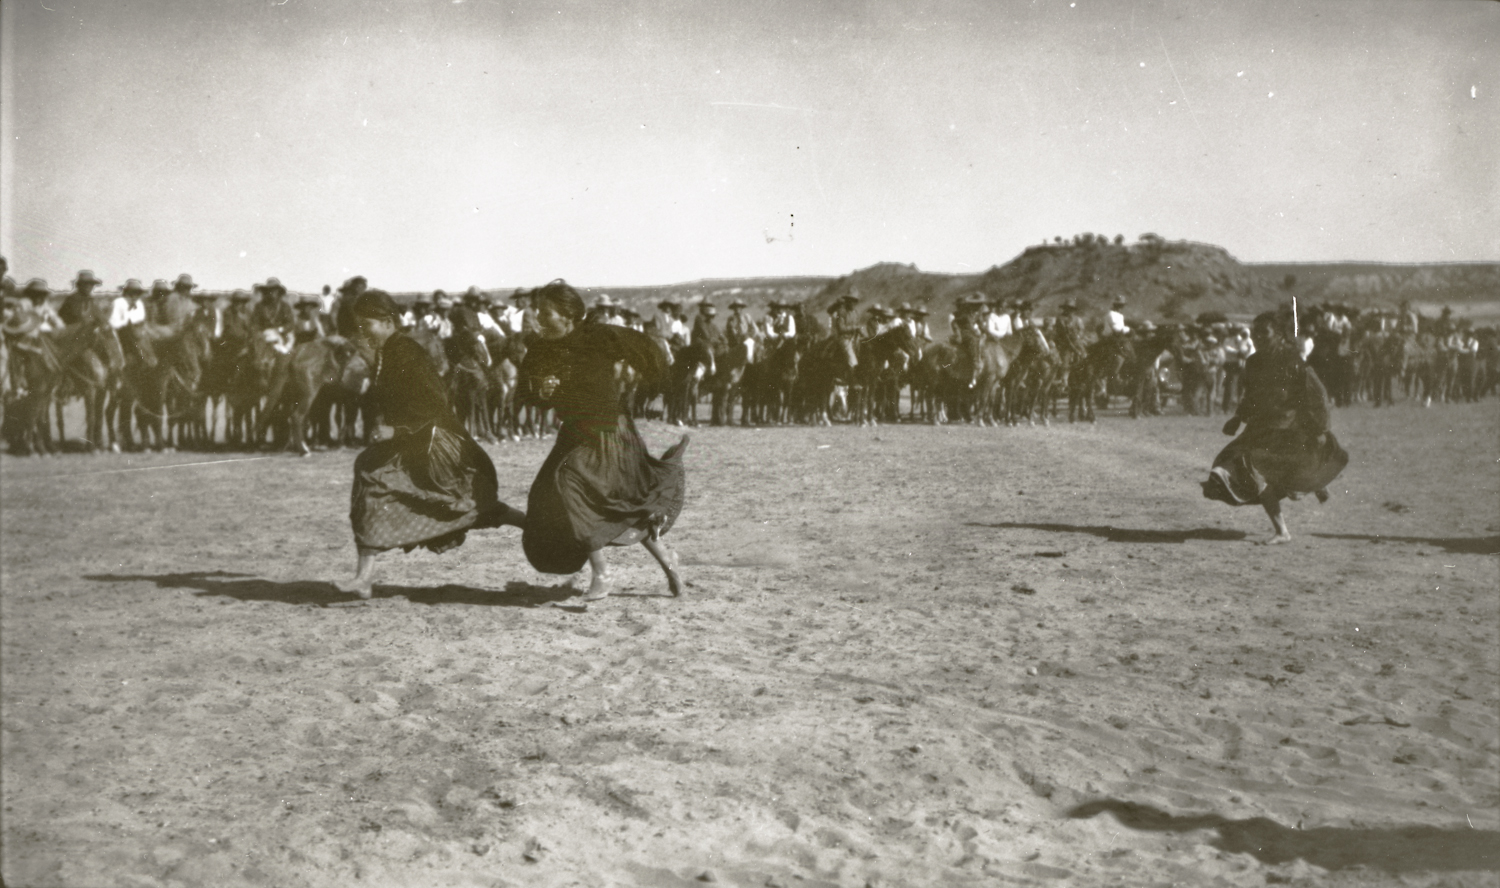 Navajo Girls in Footrace, Navajo Reservation, Arizona, July 4, 1913. Photograph by Joseph Dixon. Courtesy of the Mathers Museum of World Cultures, Wanamaker Collection, Indiana University, Bloomington, I.N., W-5386.